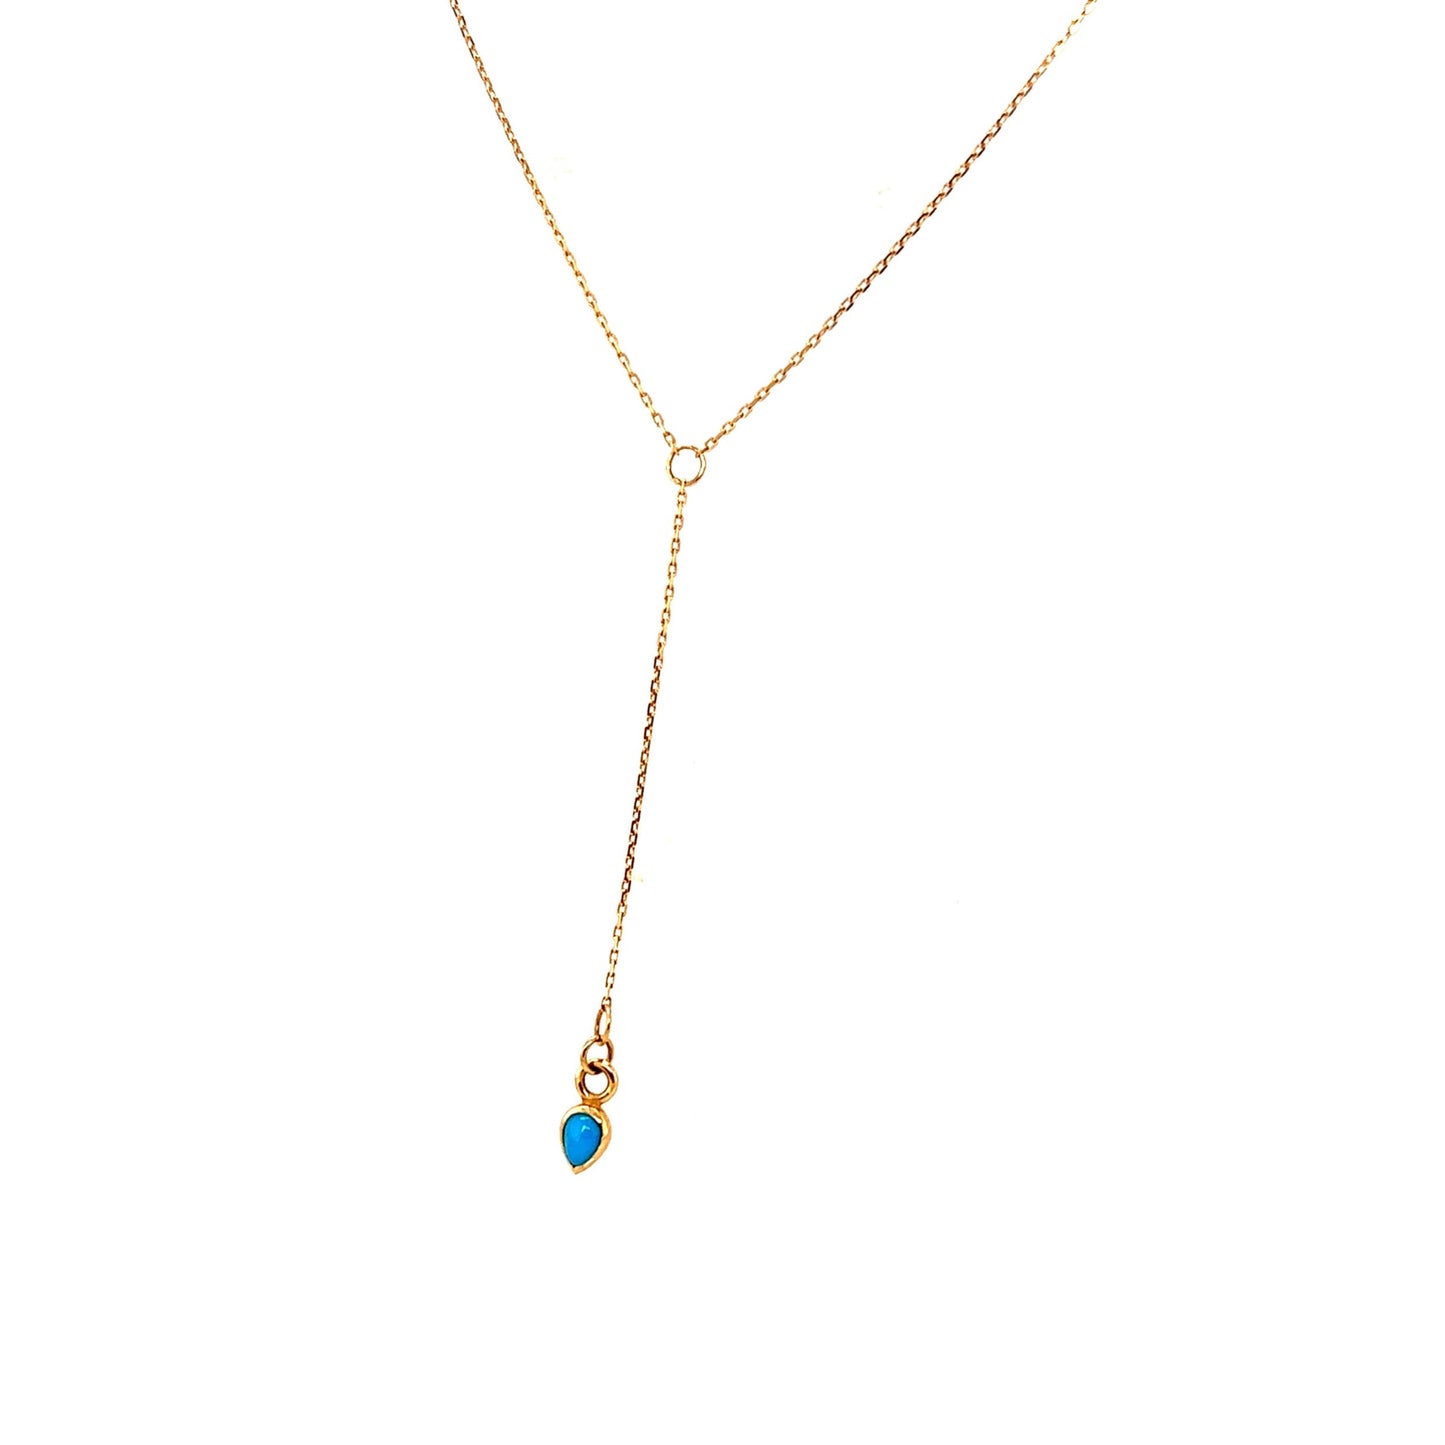 Metier 9KT Yellow Gold Pear Shape Turquoise Lariat Necklace